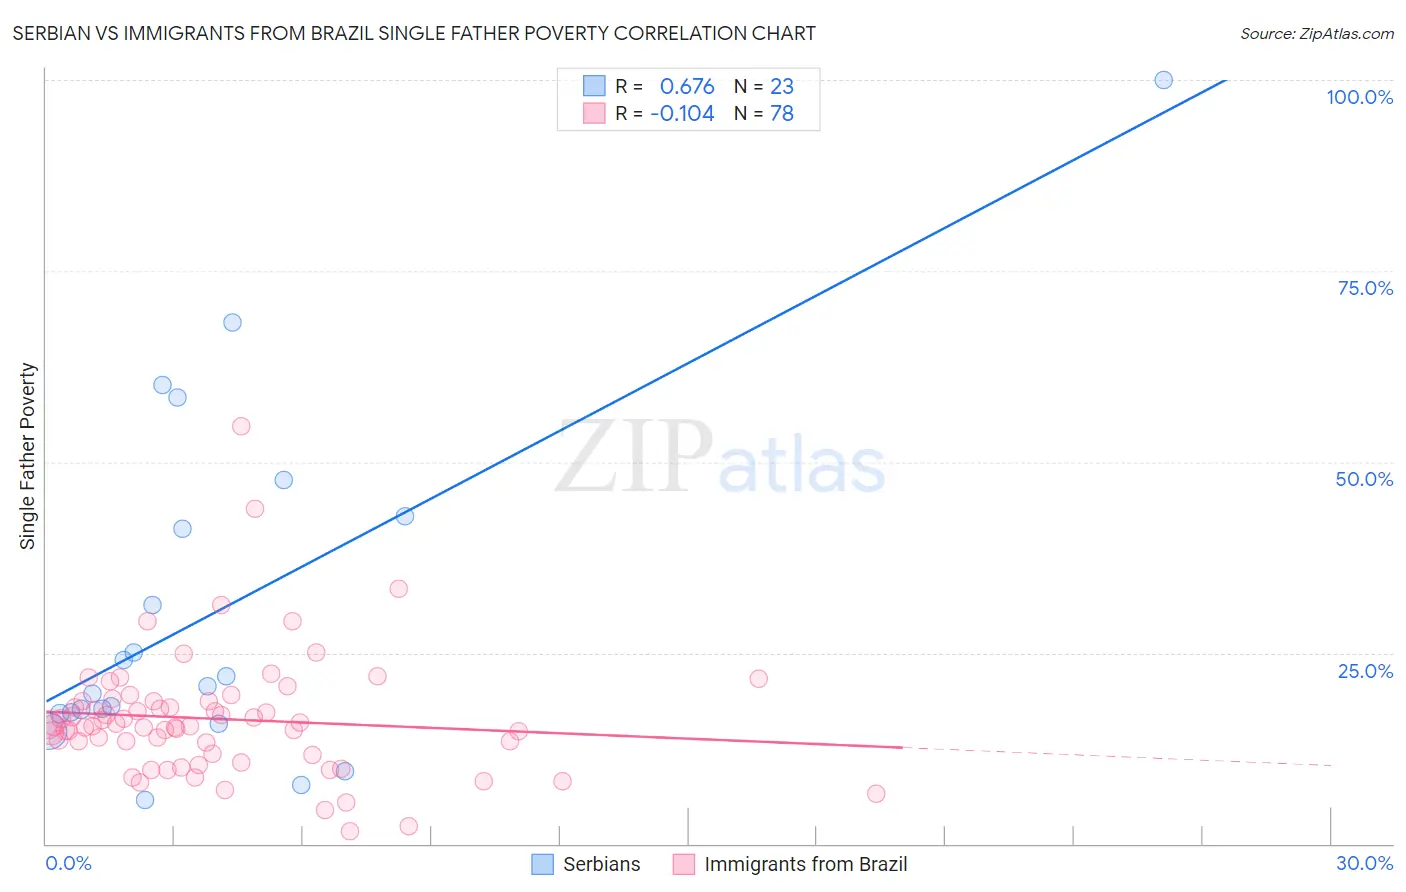 Serbian vs Immigrants from Brazil Single Father Poverty